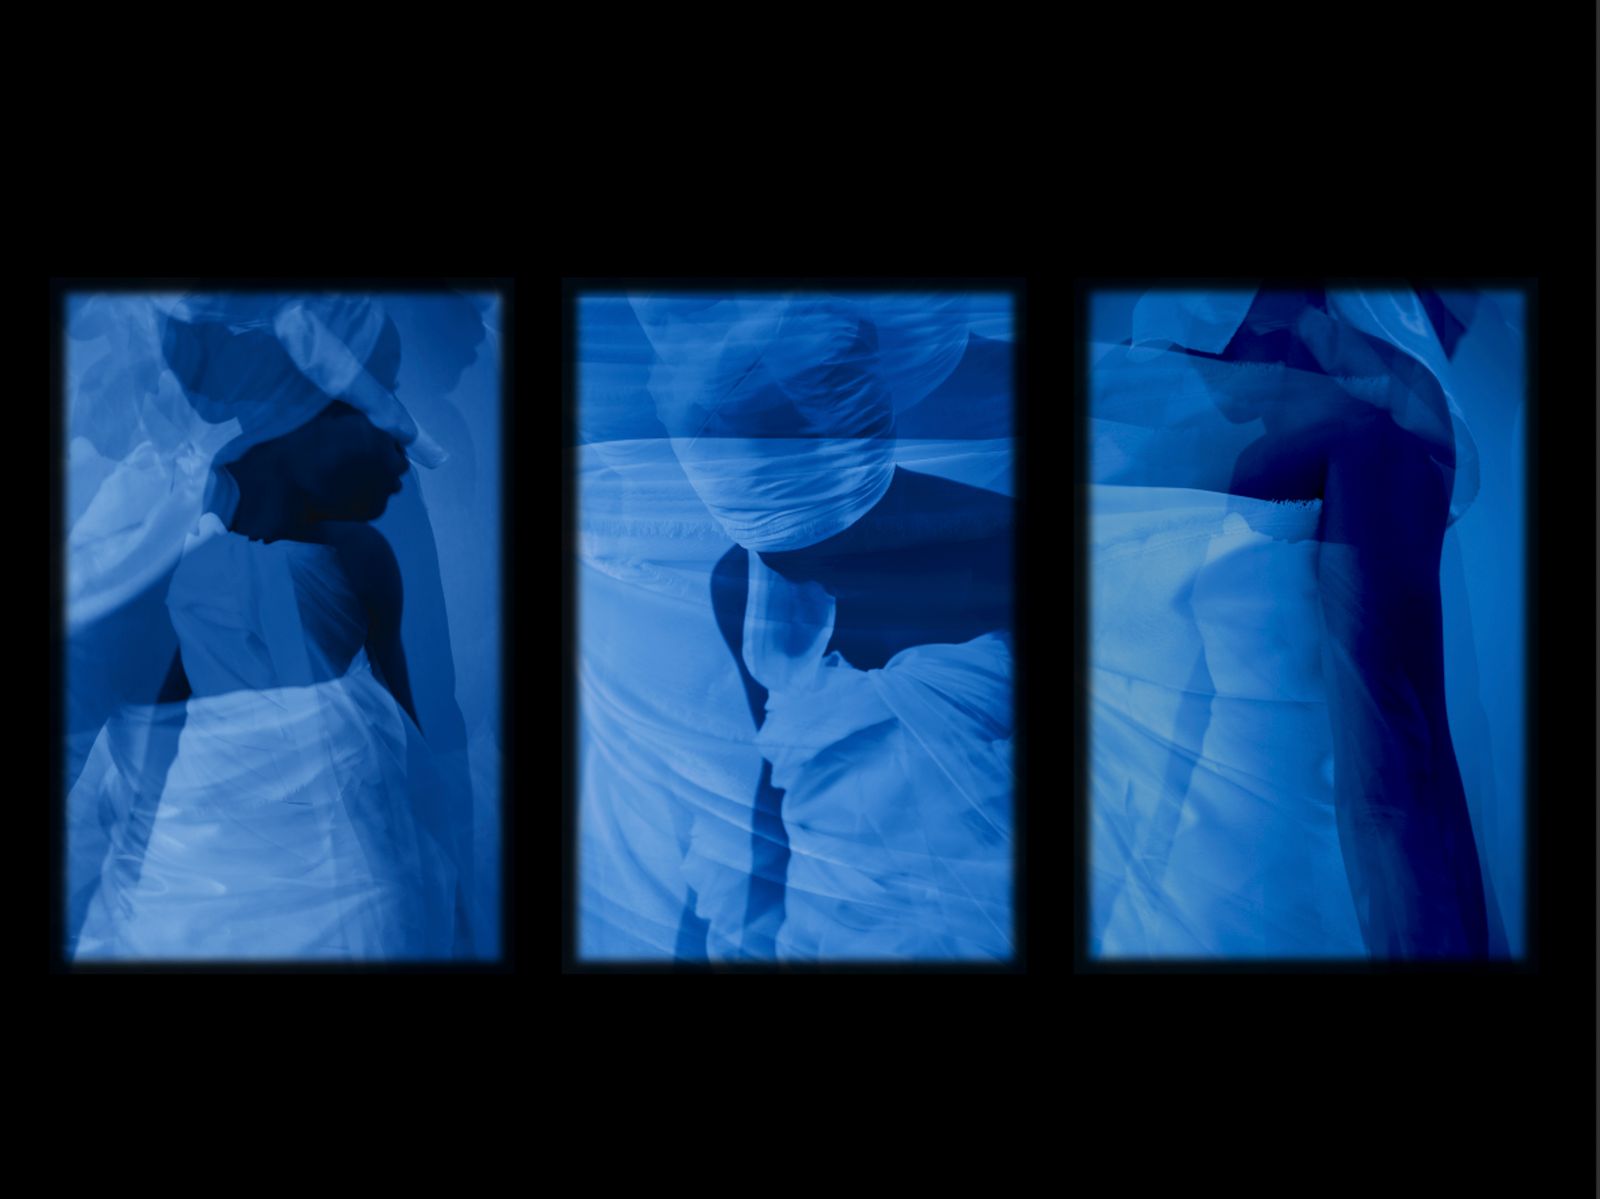 © Heather Agyepong - Lot's Wife, (Triptych) ego death, Commissioned by Jerwood Arts & Photoworks, 2022